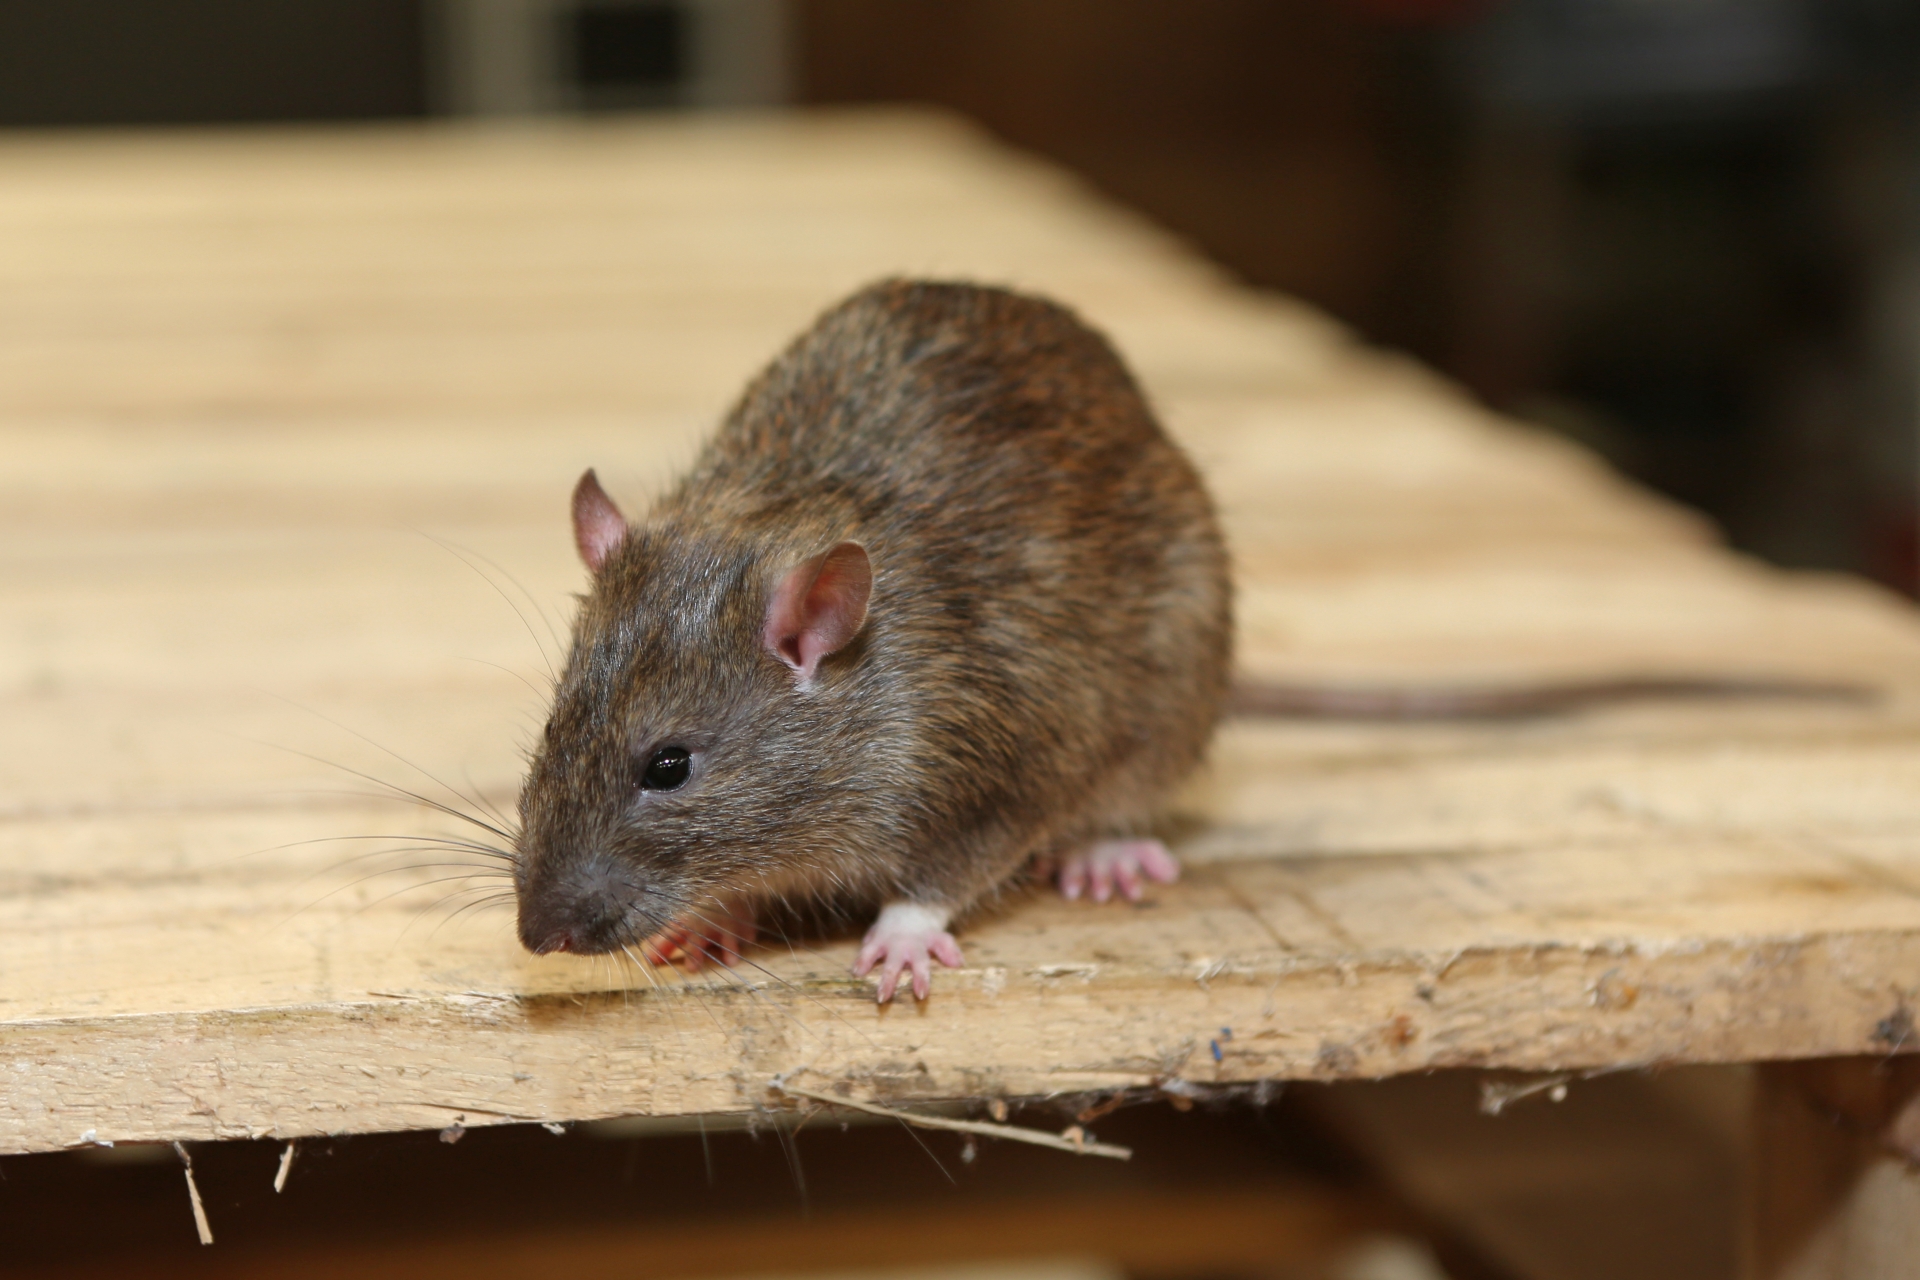 Rat extermination, Pest Control in Watford, Cassiobury, WD17. Call Now 020 8166 9746